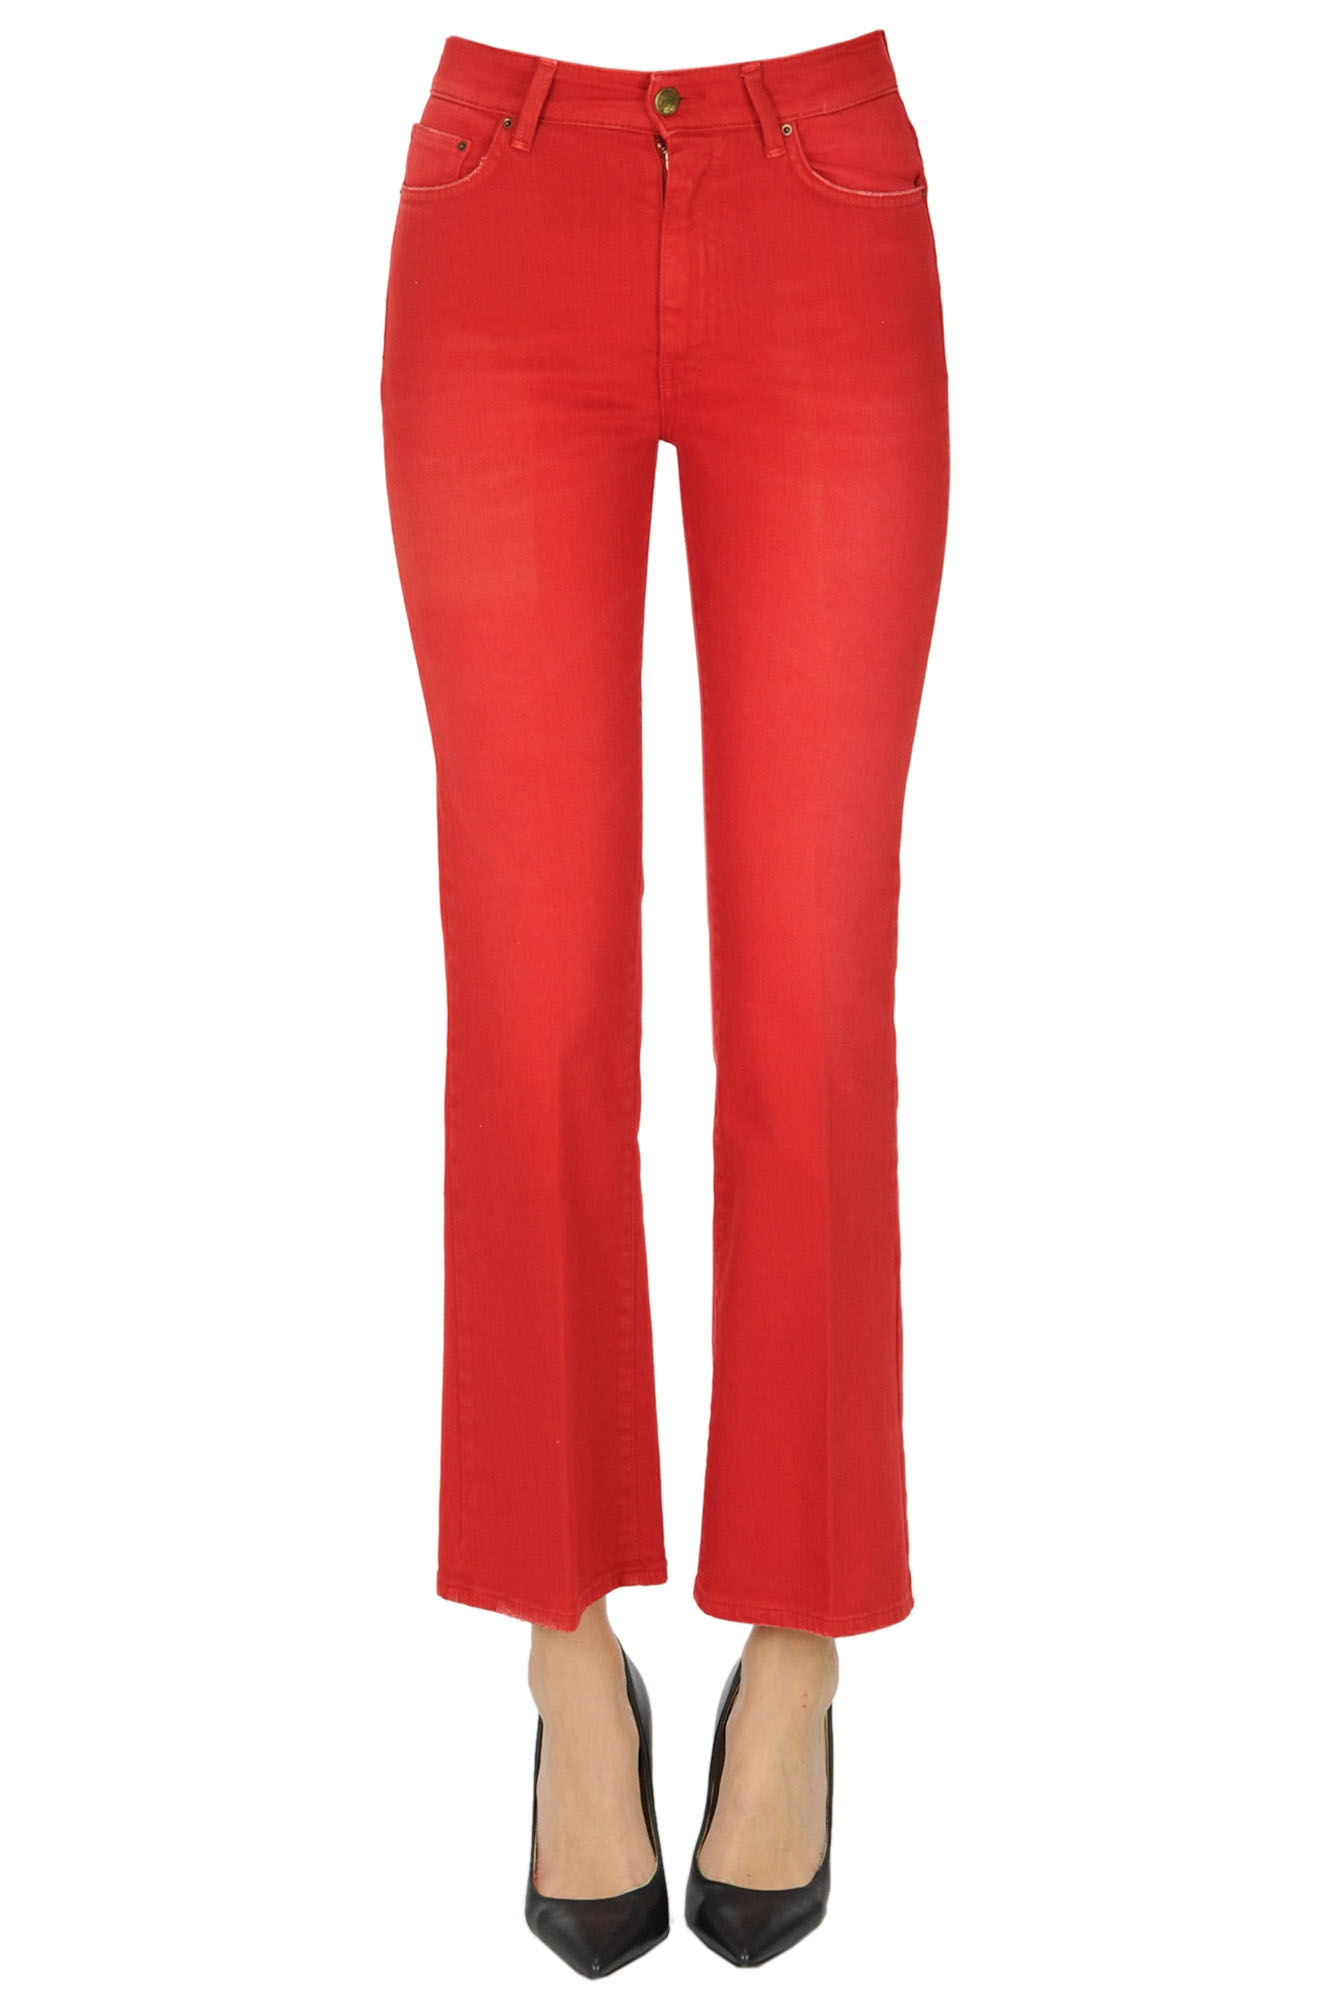 Ps. Don't Forget Me Flared Leg Jeans In Red